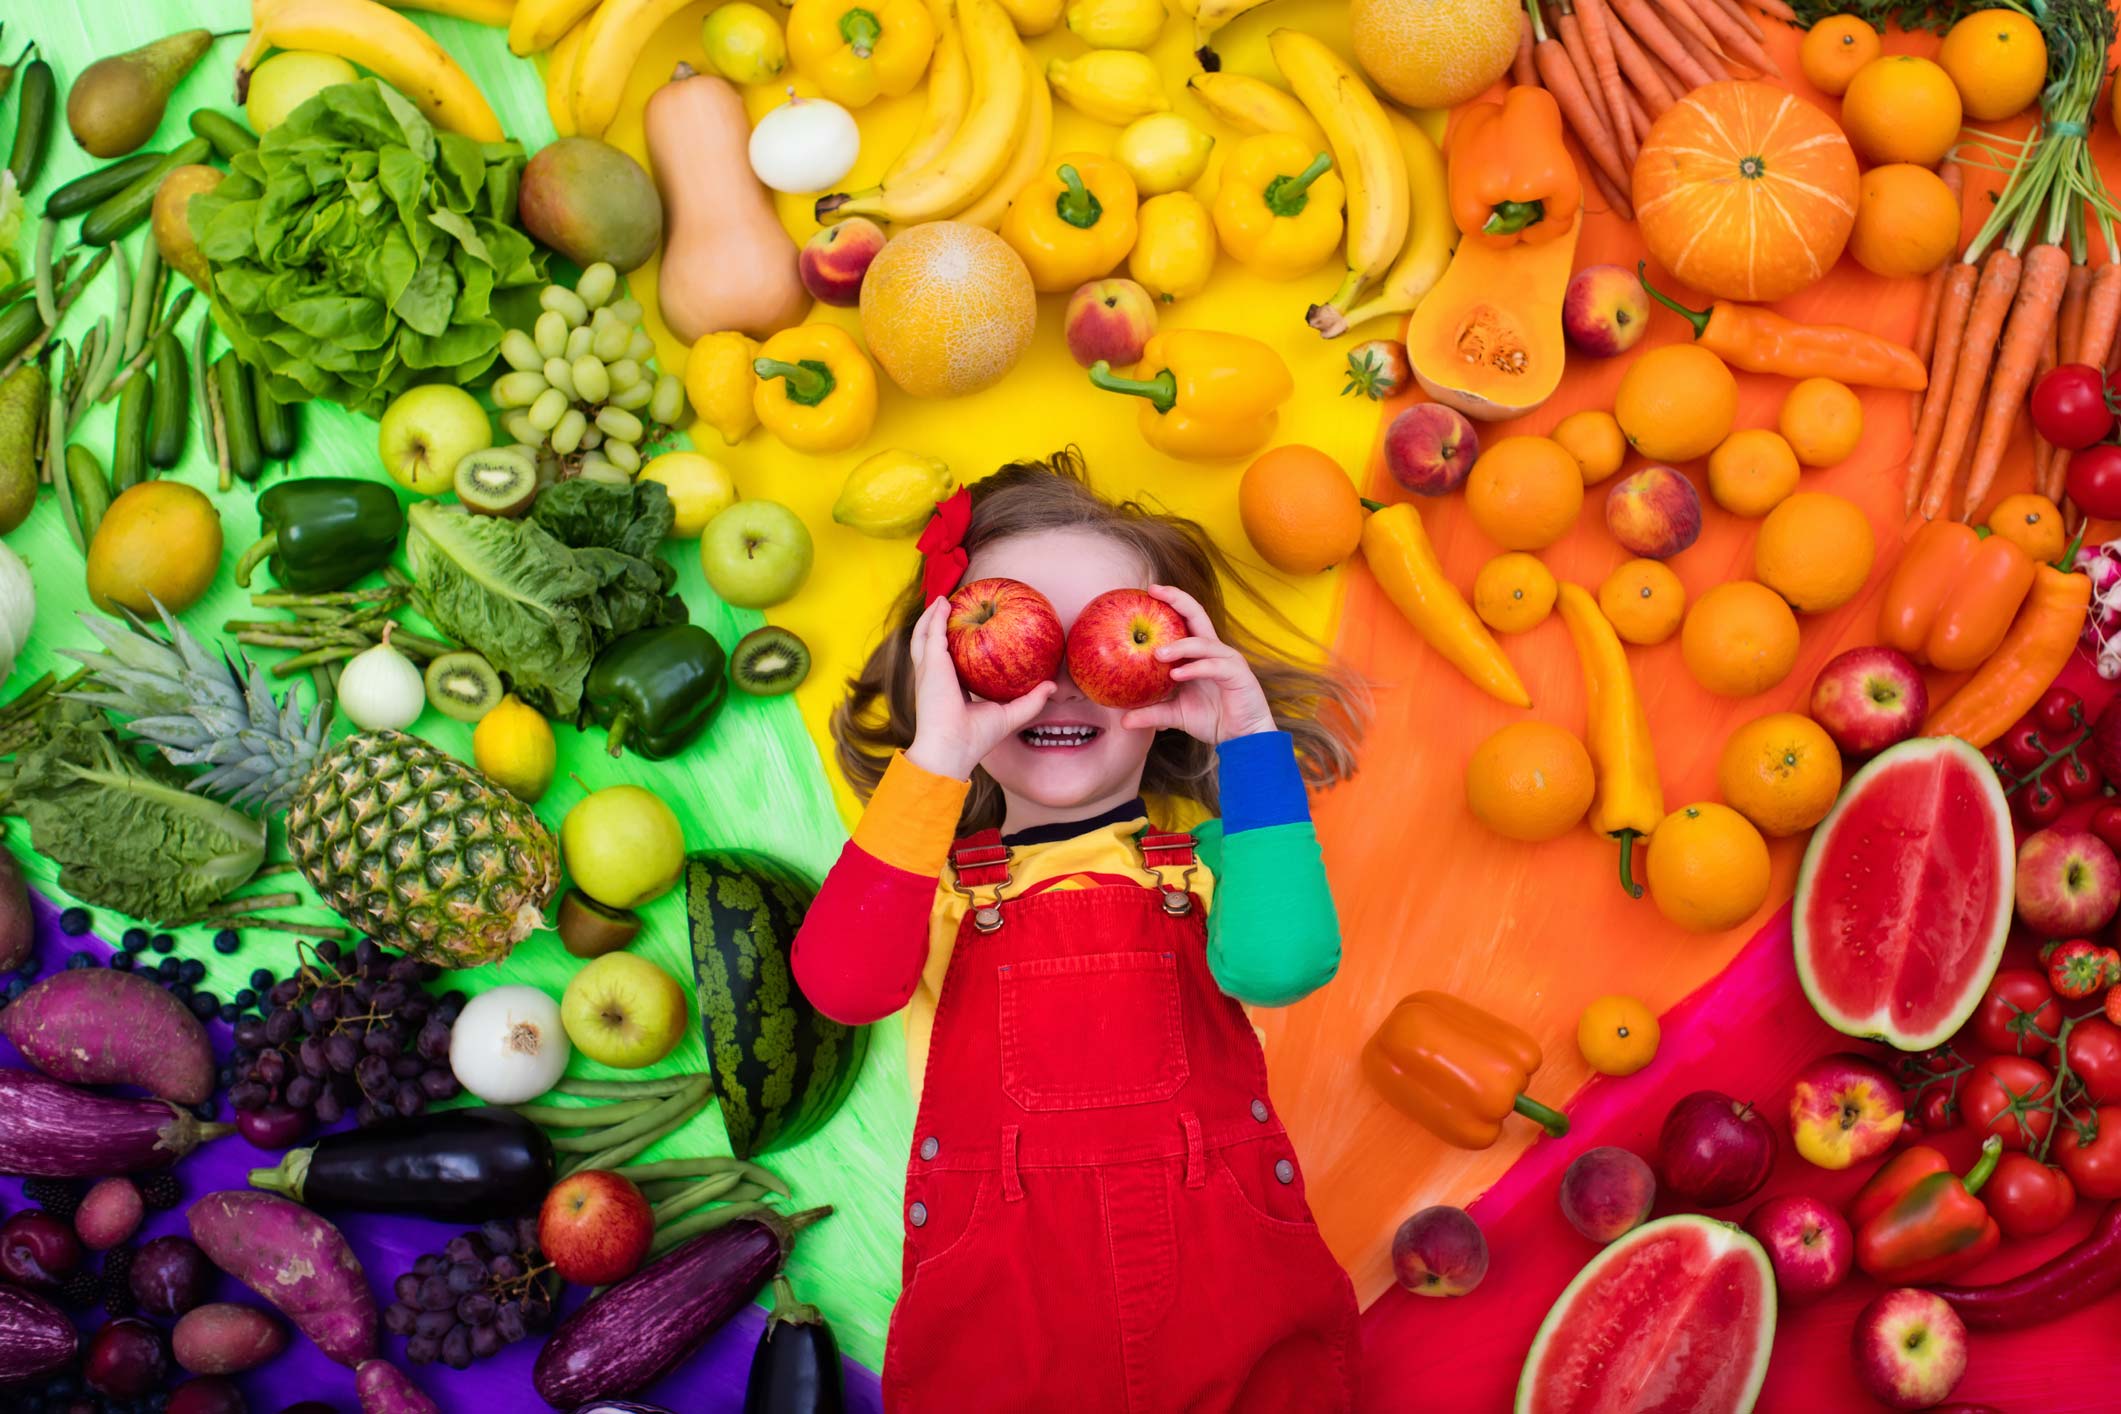 Child Nutrition Nurturing The Next Generation Of Healthy Eaters